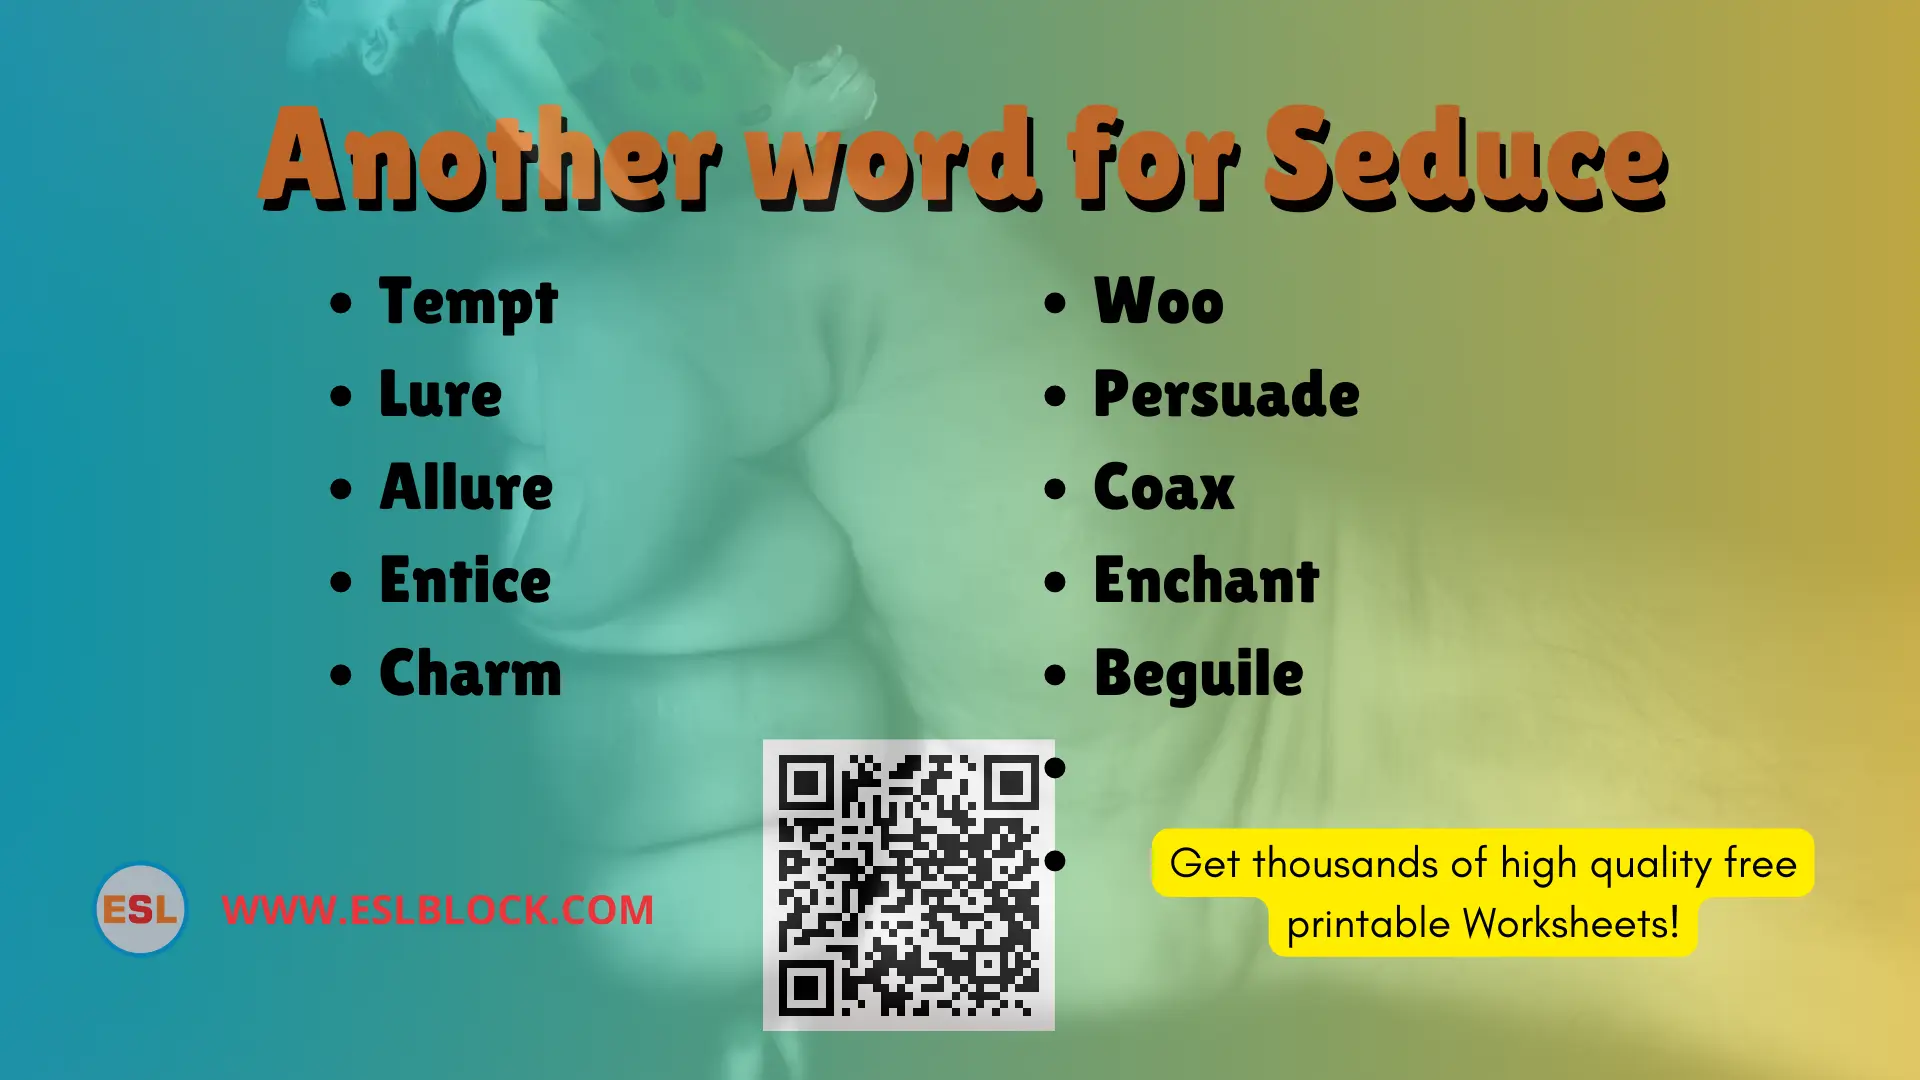 _What is another word for Seduce